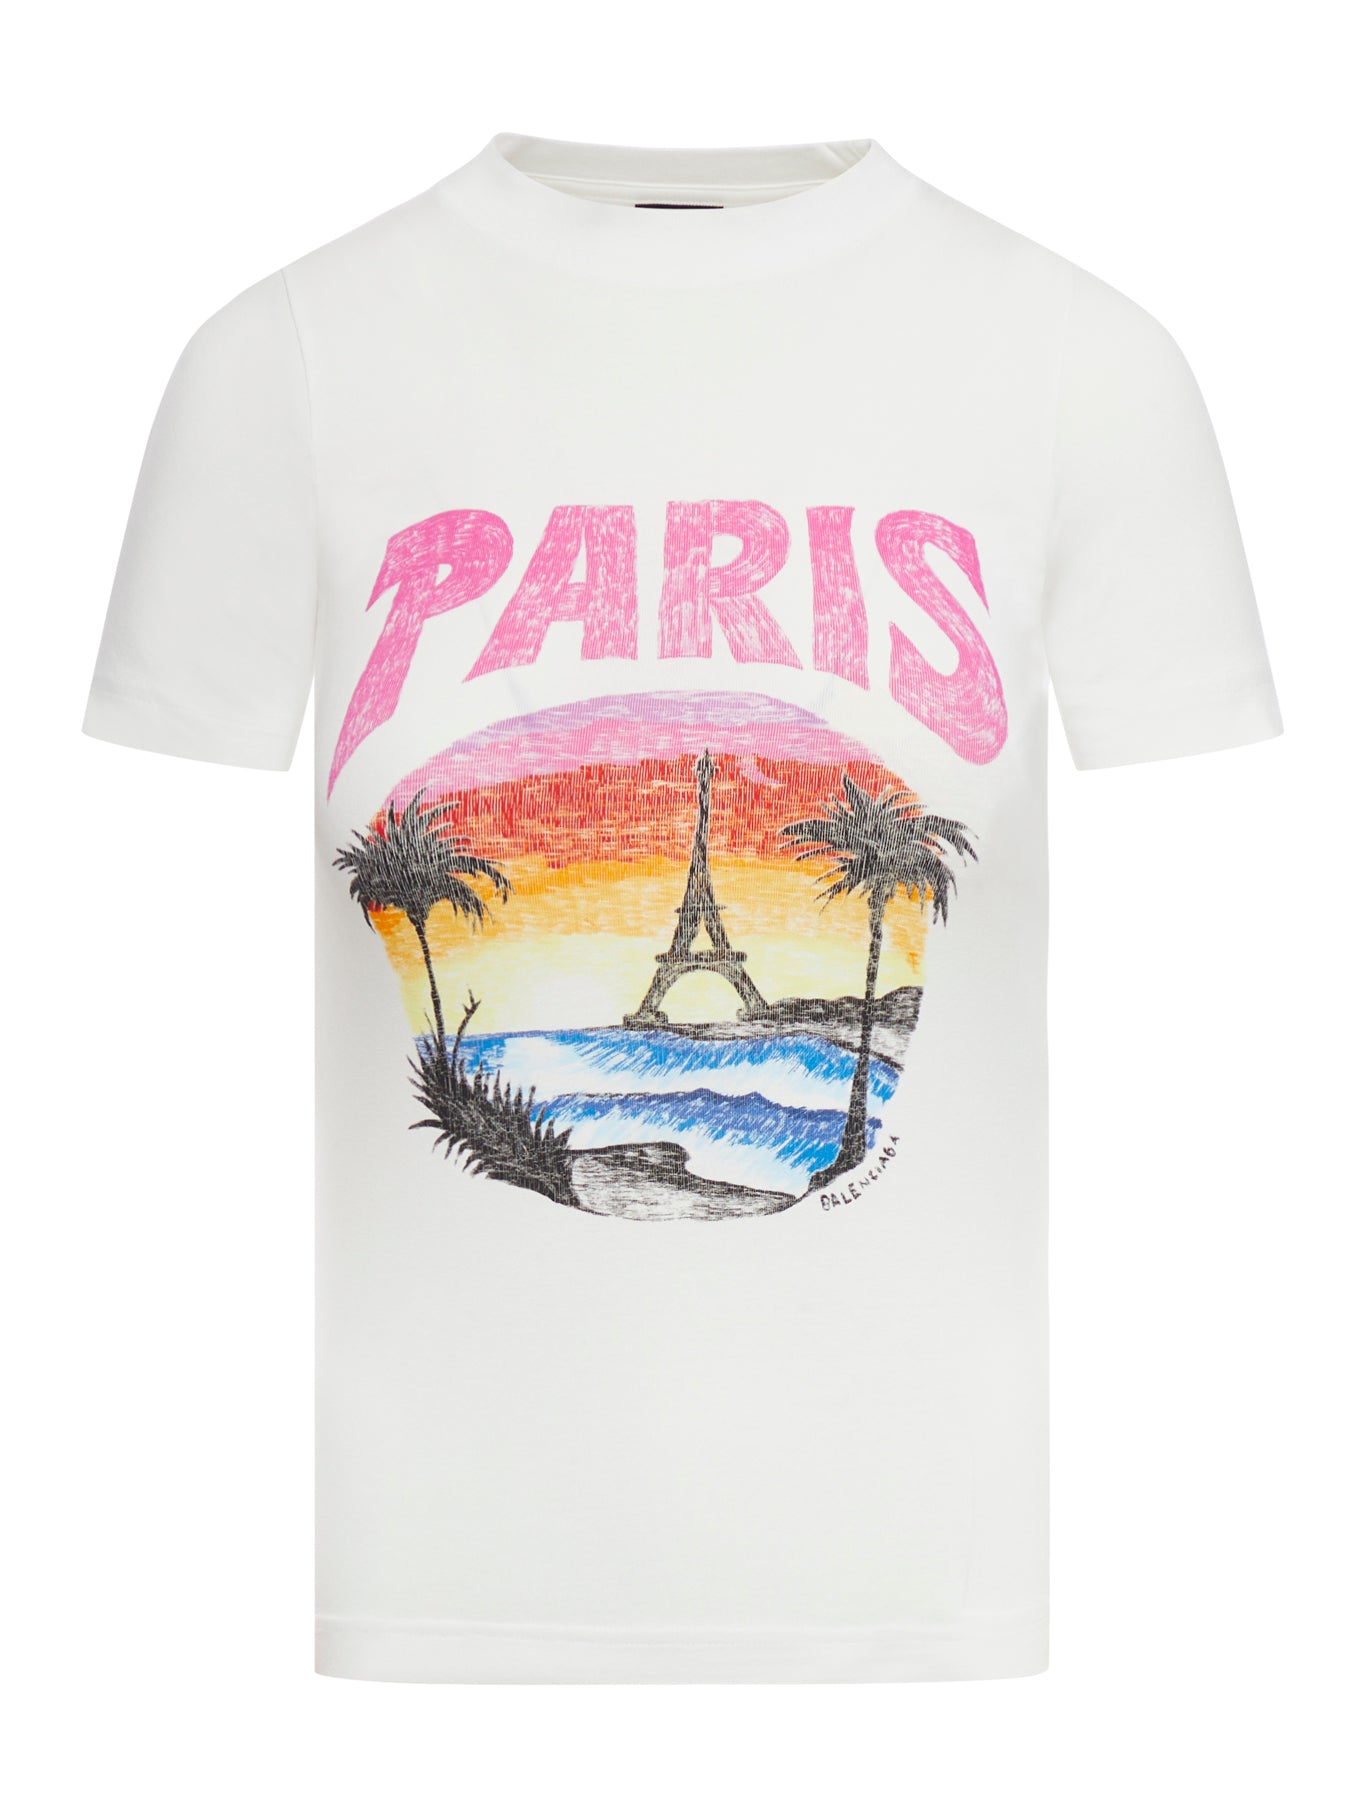 FITTED T-SHIRT PARIS TROPICAL STR JERSEY PEEL